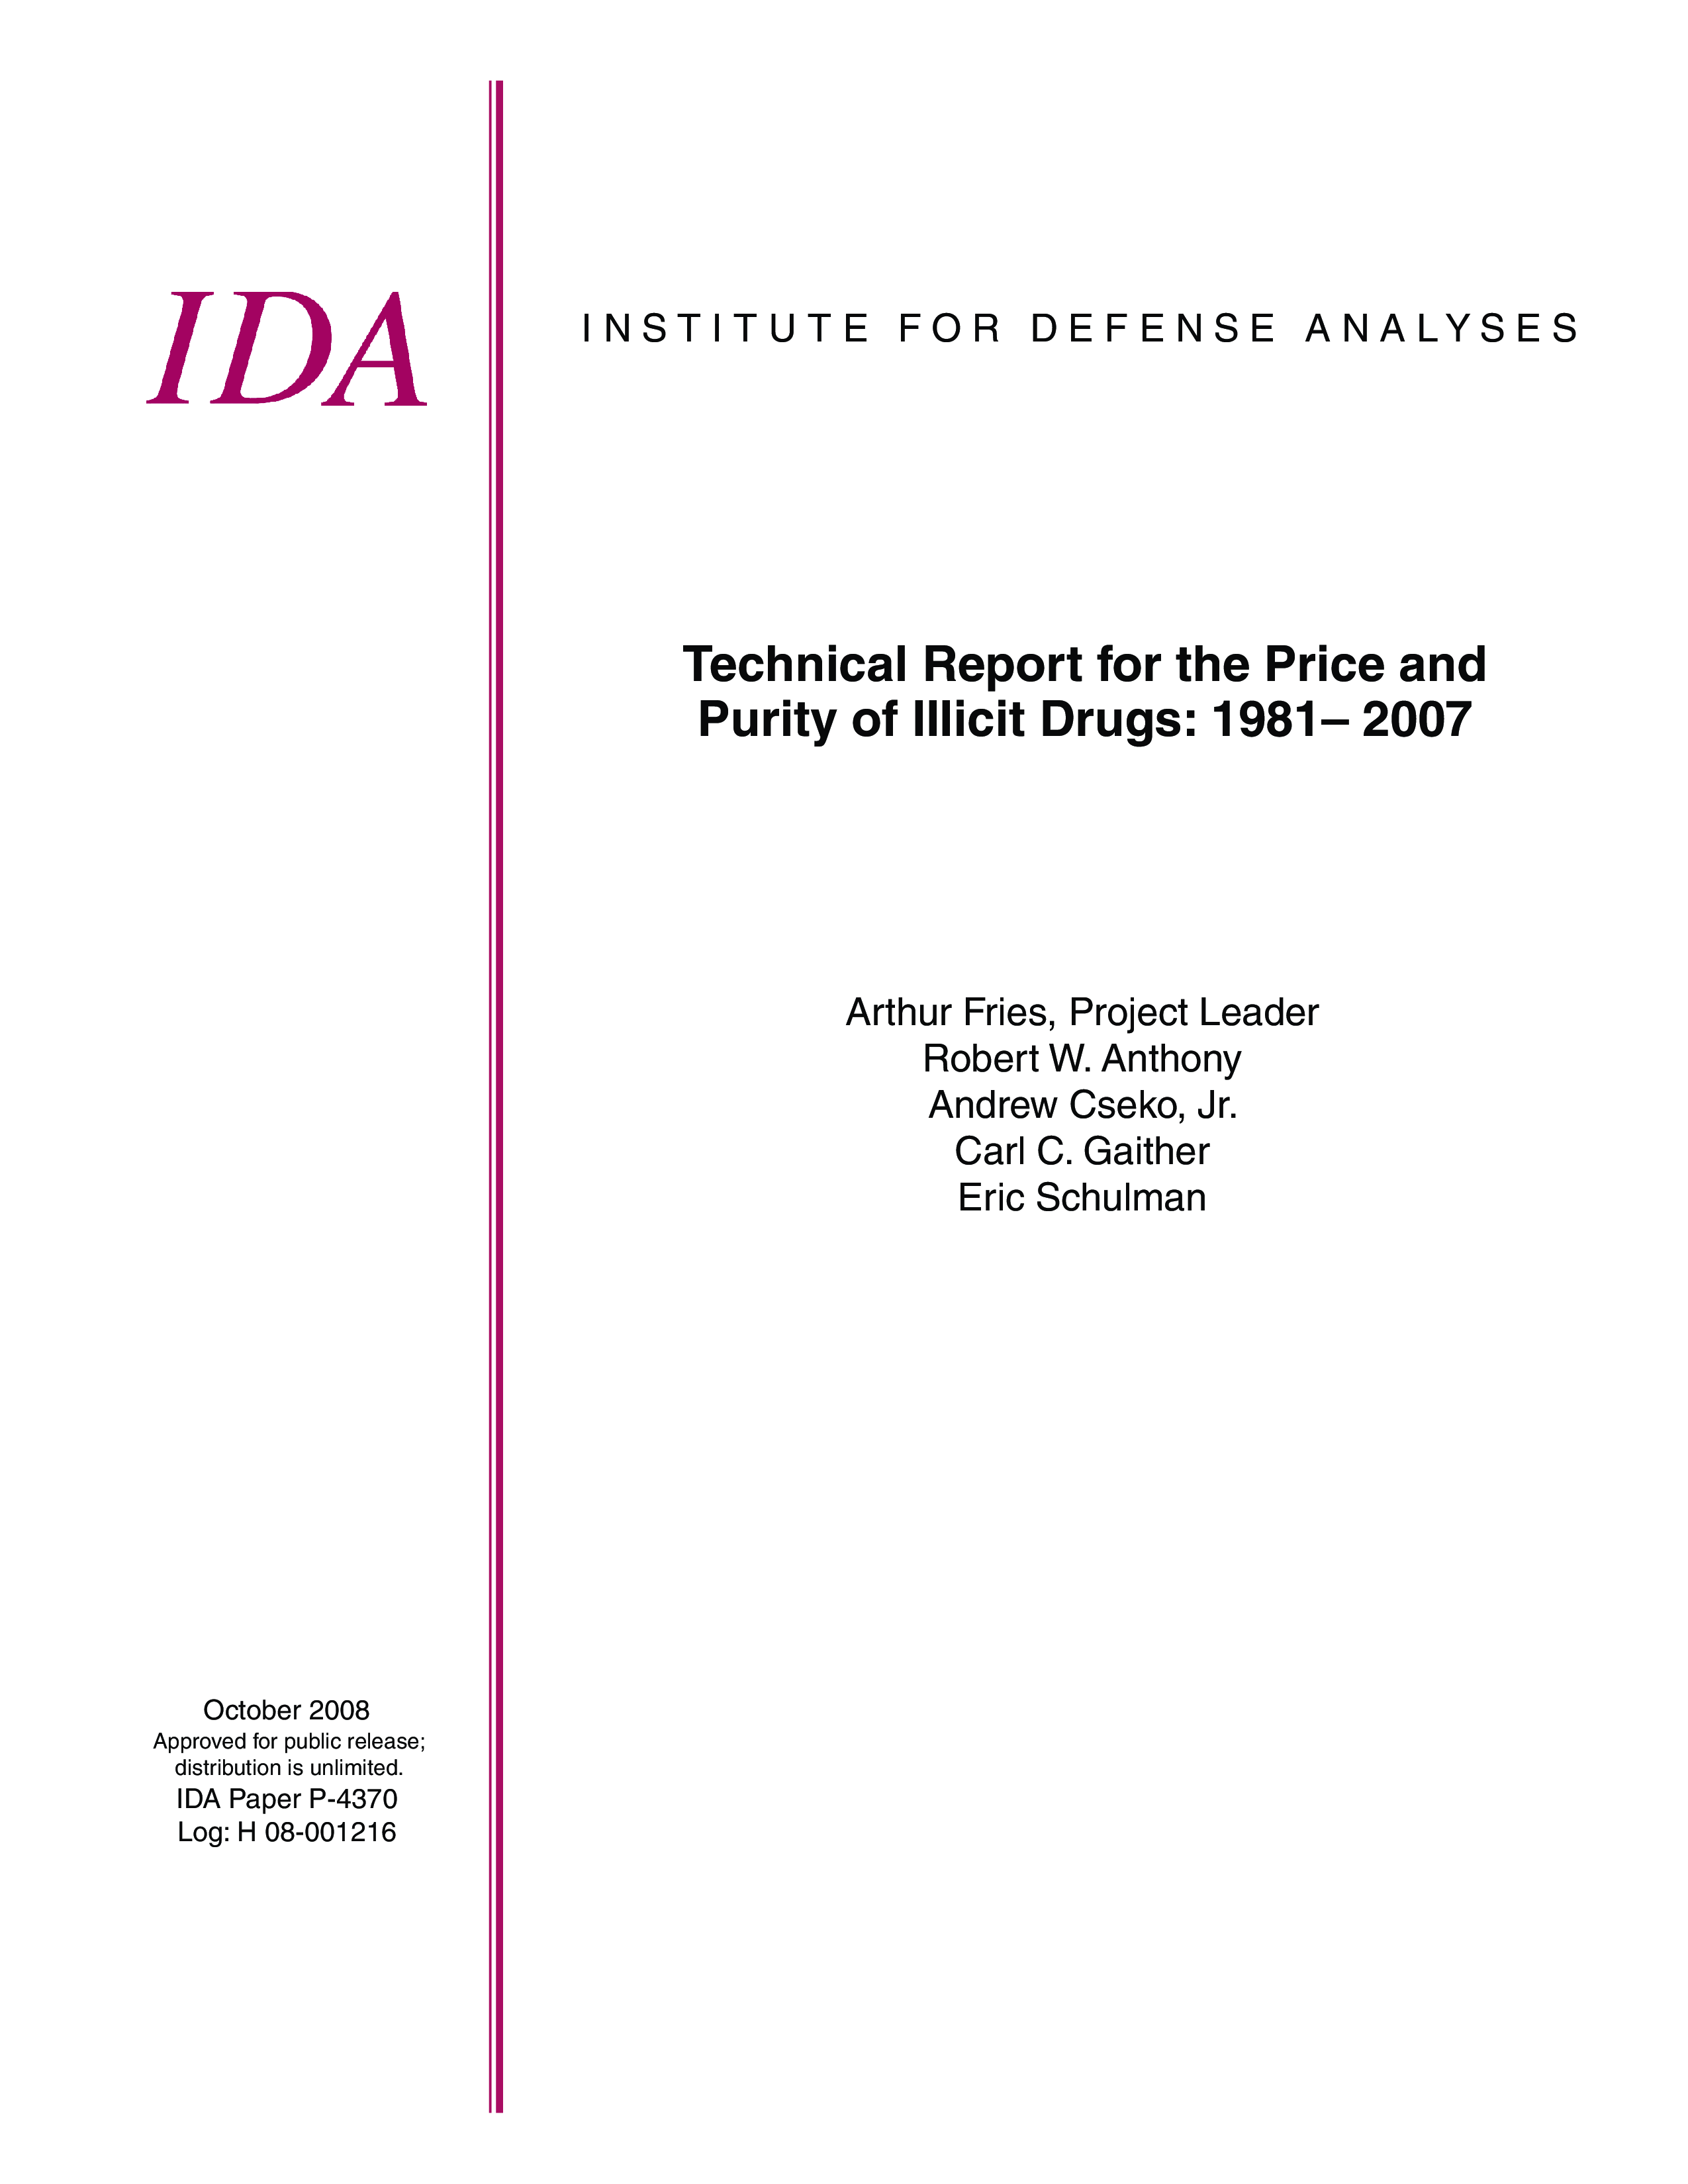 Technical Report for the Price and Purity of Illicit Drugs: 1981 – 2007